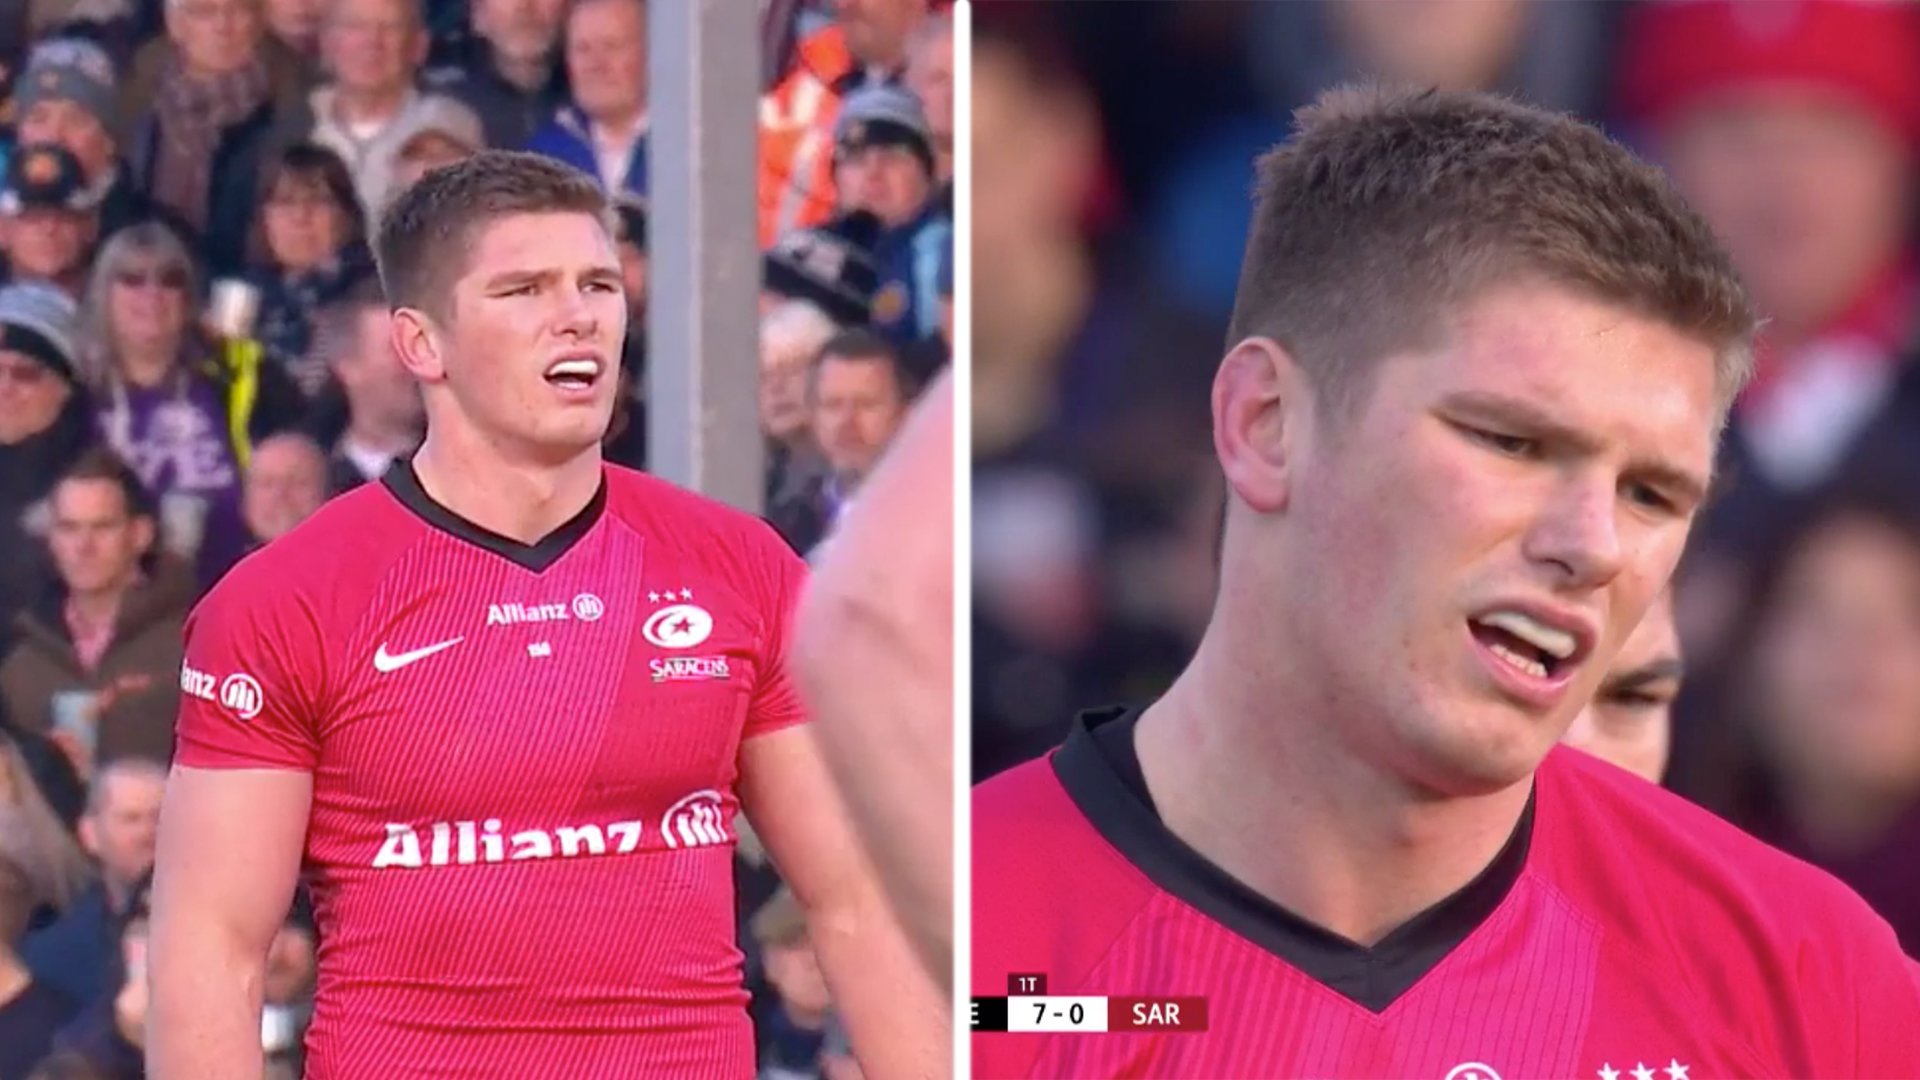 People are saying that Owen Farrell looks festively plump in final game of year